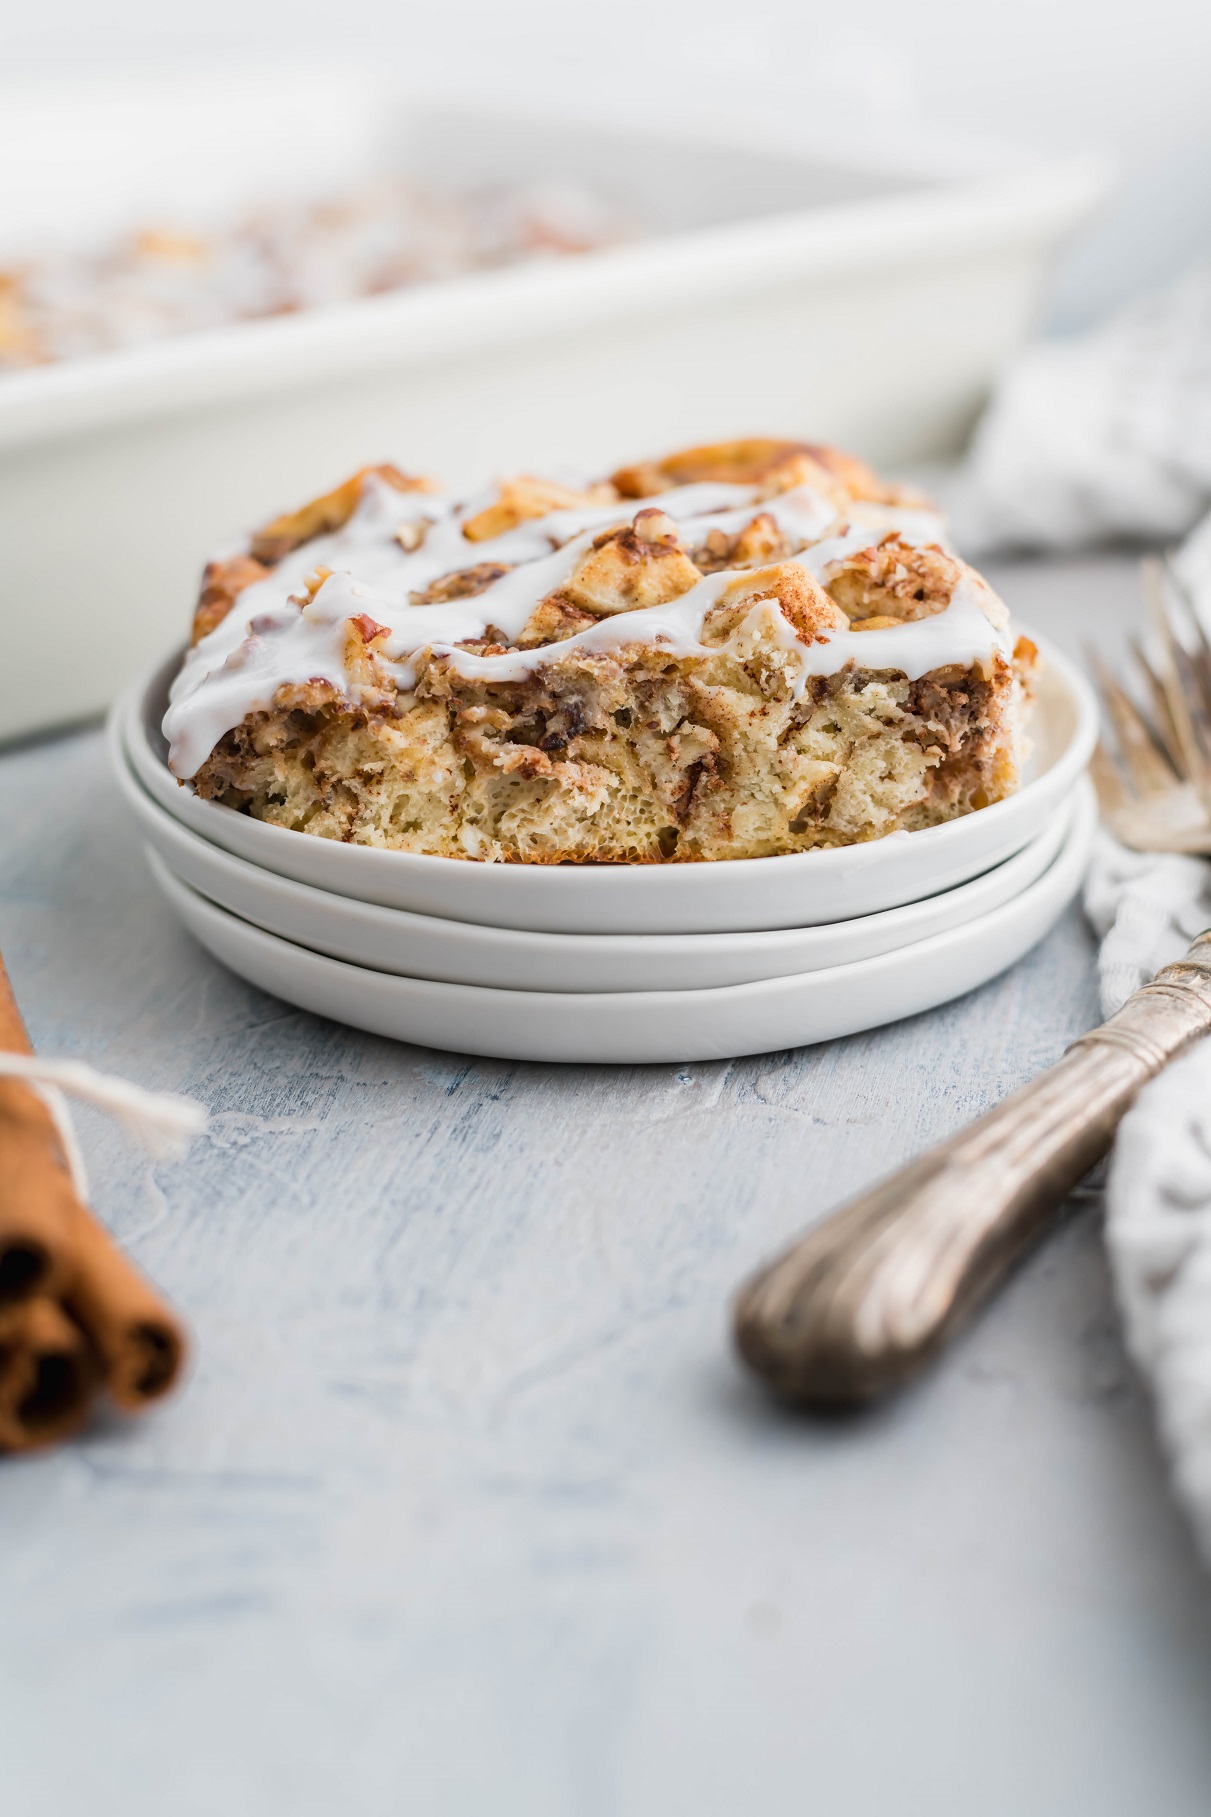 Slice of cinnamon roll casserole on a small white plate with casserole dish in the background.